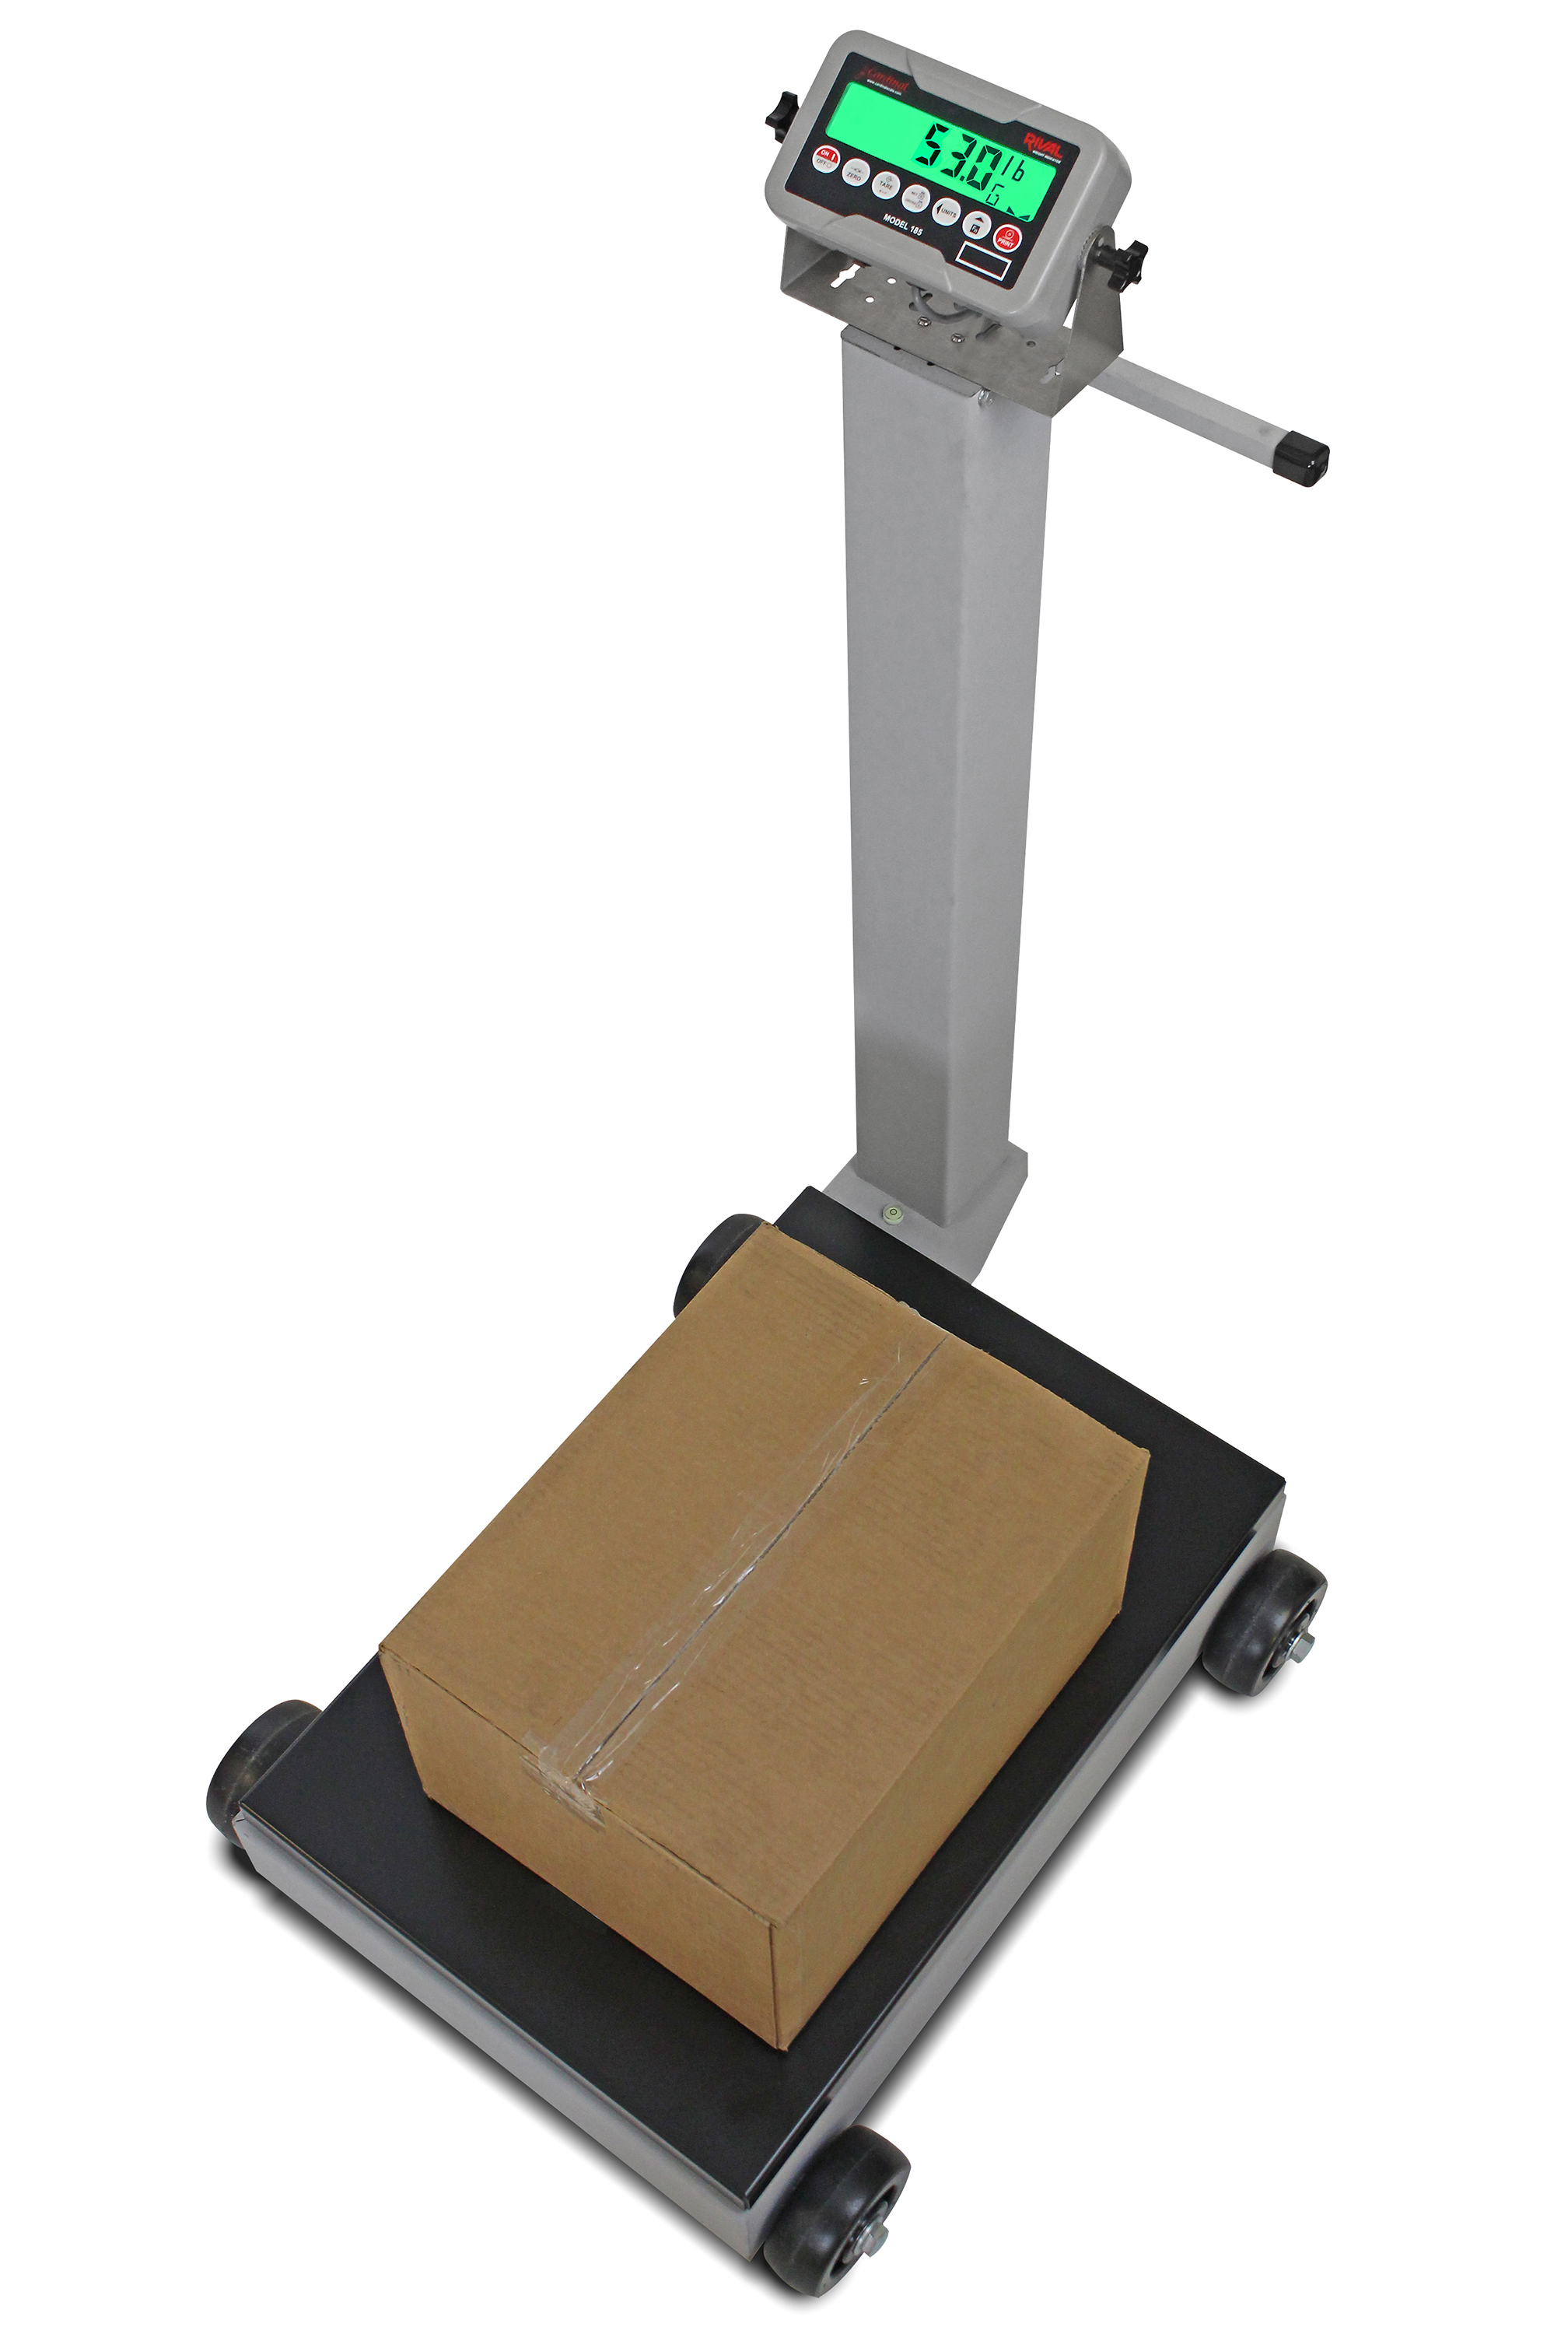 Detecto T5 Top Loading Dial Scale 5 lb Capacity